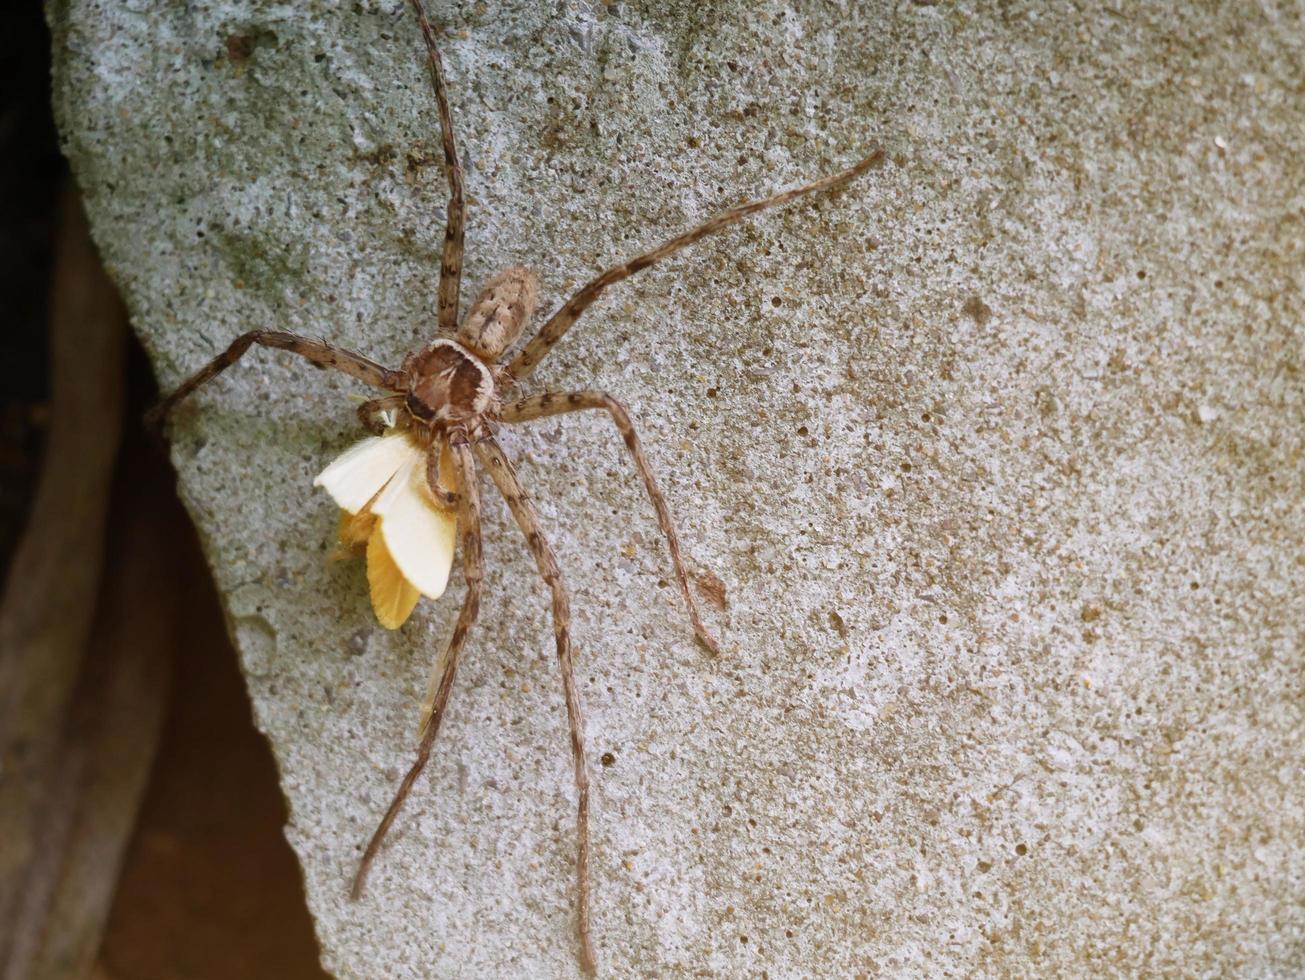 The brown spider grabs its prey for food. photo